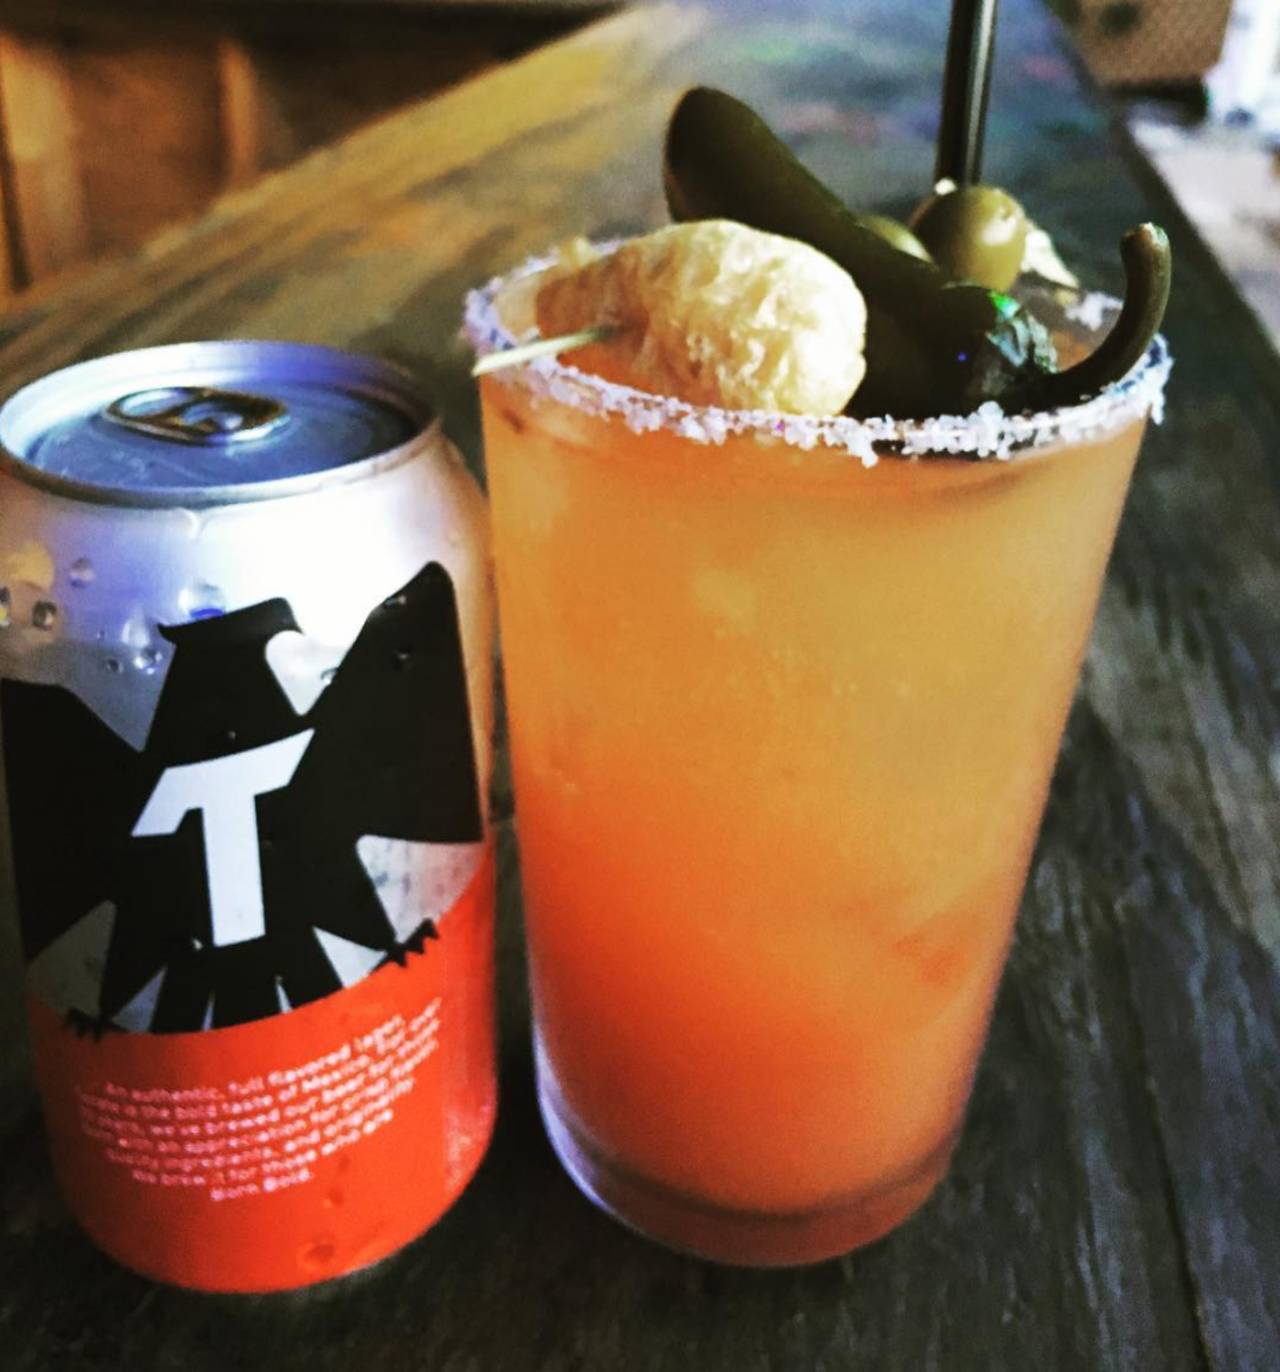 The Squeezebox
2806 N. St. Mary’s St., facebook.com/thesqueezebox
Who knew cumbias and cocktails would blend so seamlessly? Try them both here.
Photo via Instagram / thesqueezebox_sa